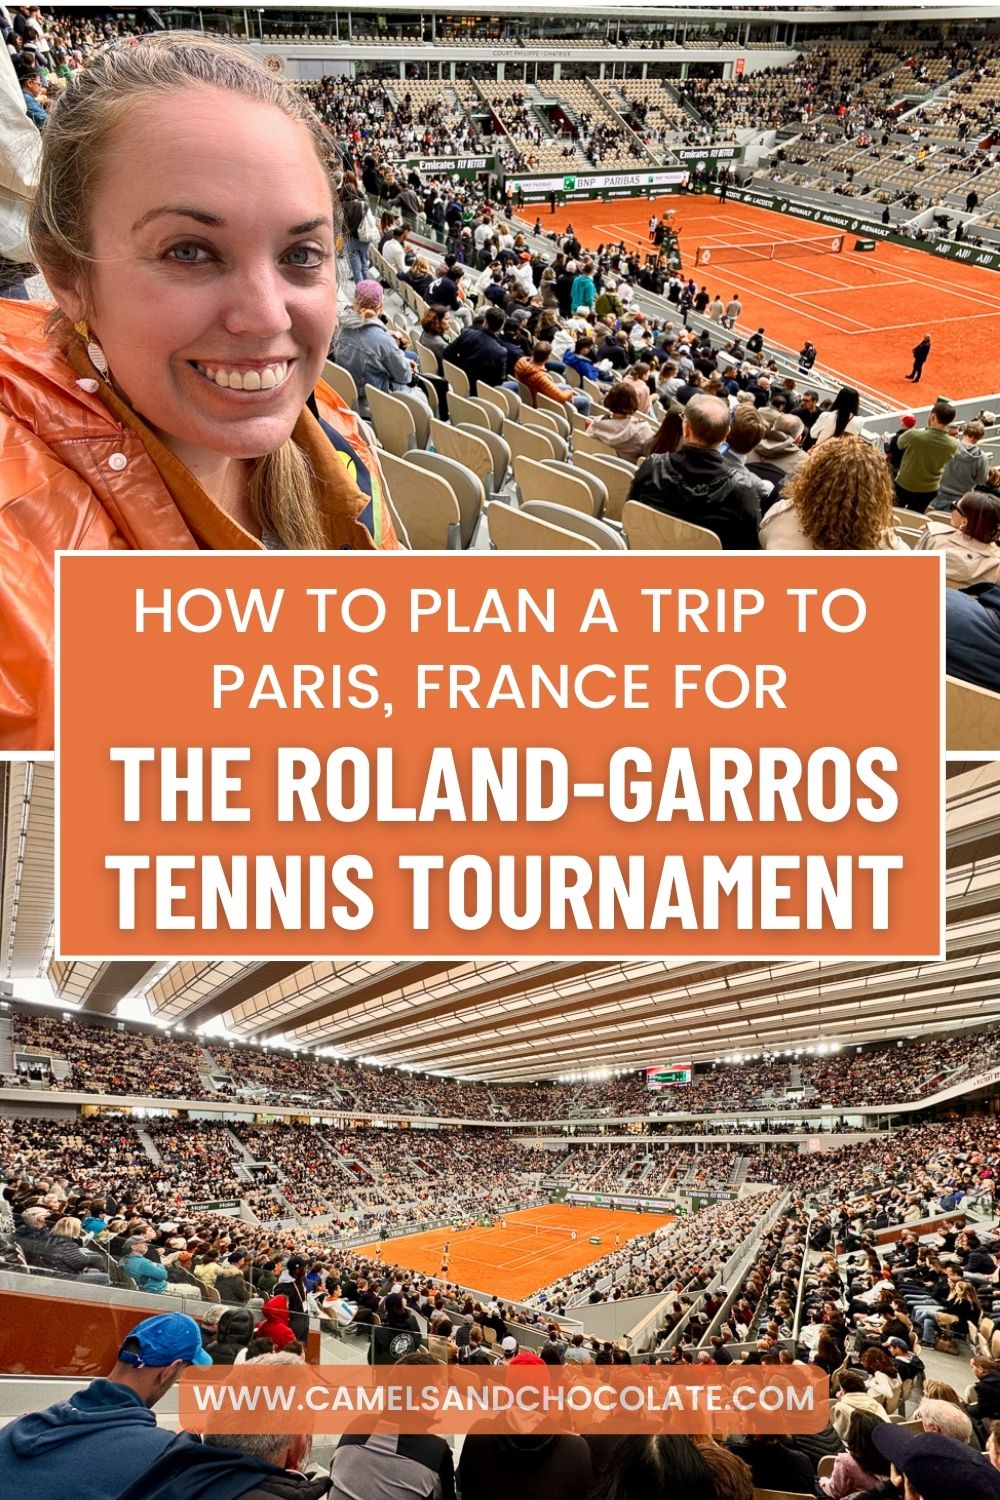 How to Plan a Trip to Roland-Garros, the French Open in Paris, France